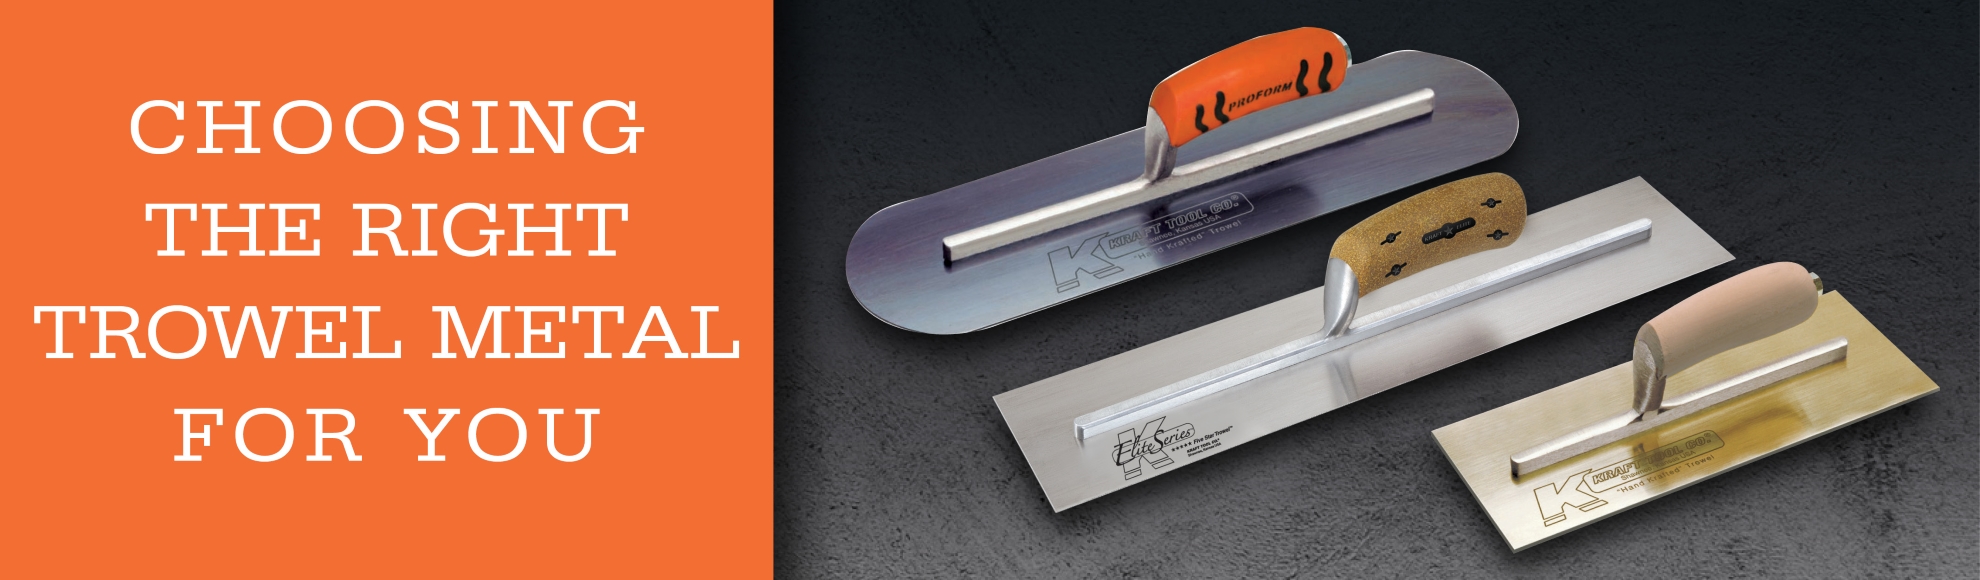 Choosing the Right Trowel Metal for You